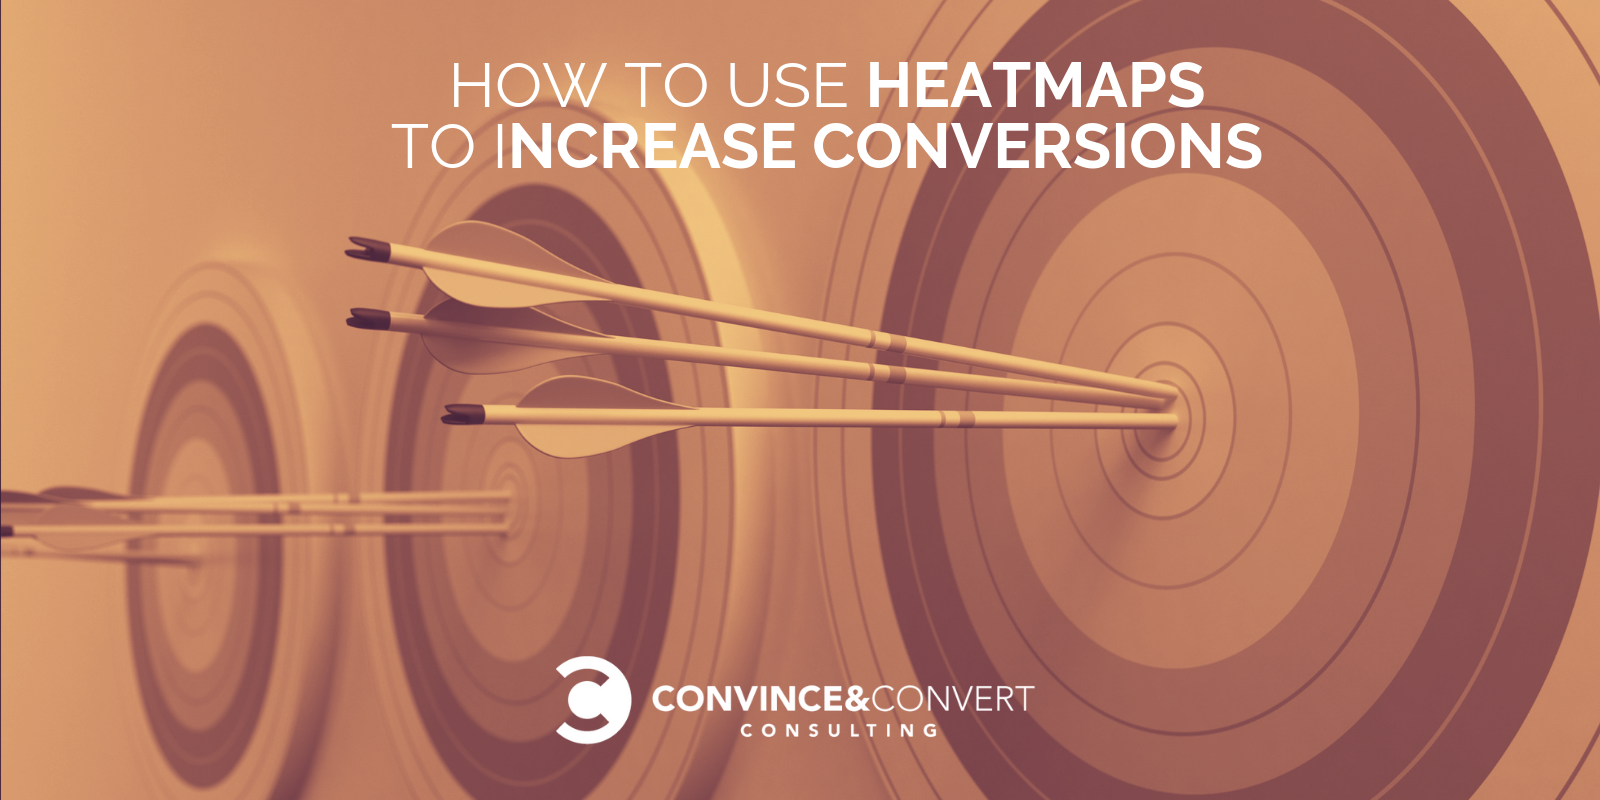 How to Use Heatmaps to Increase Your Conversions